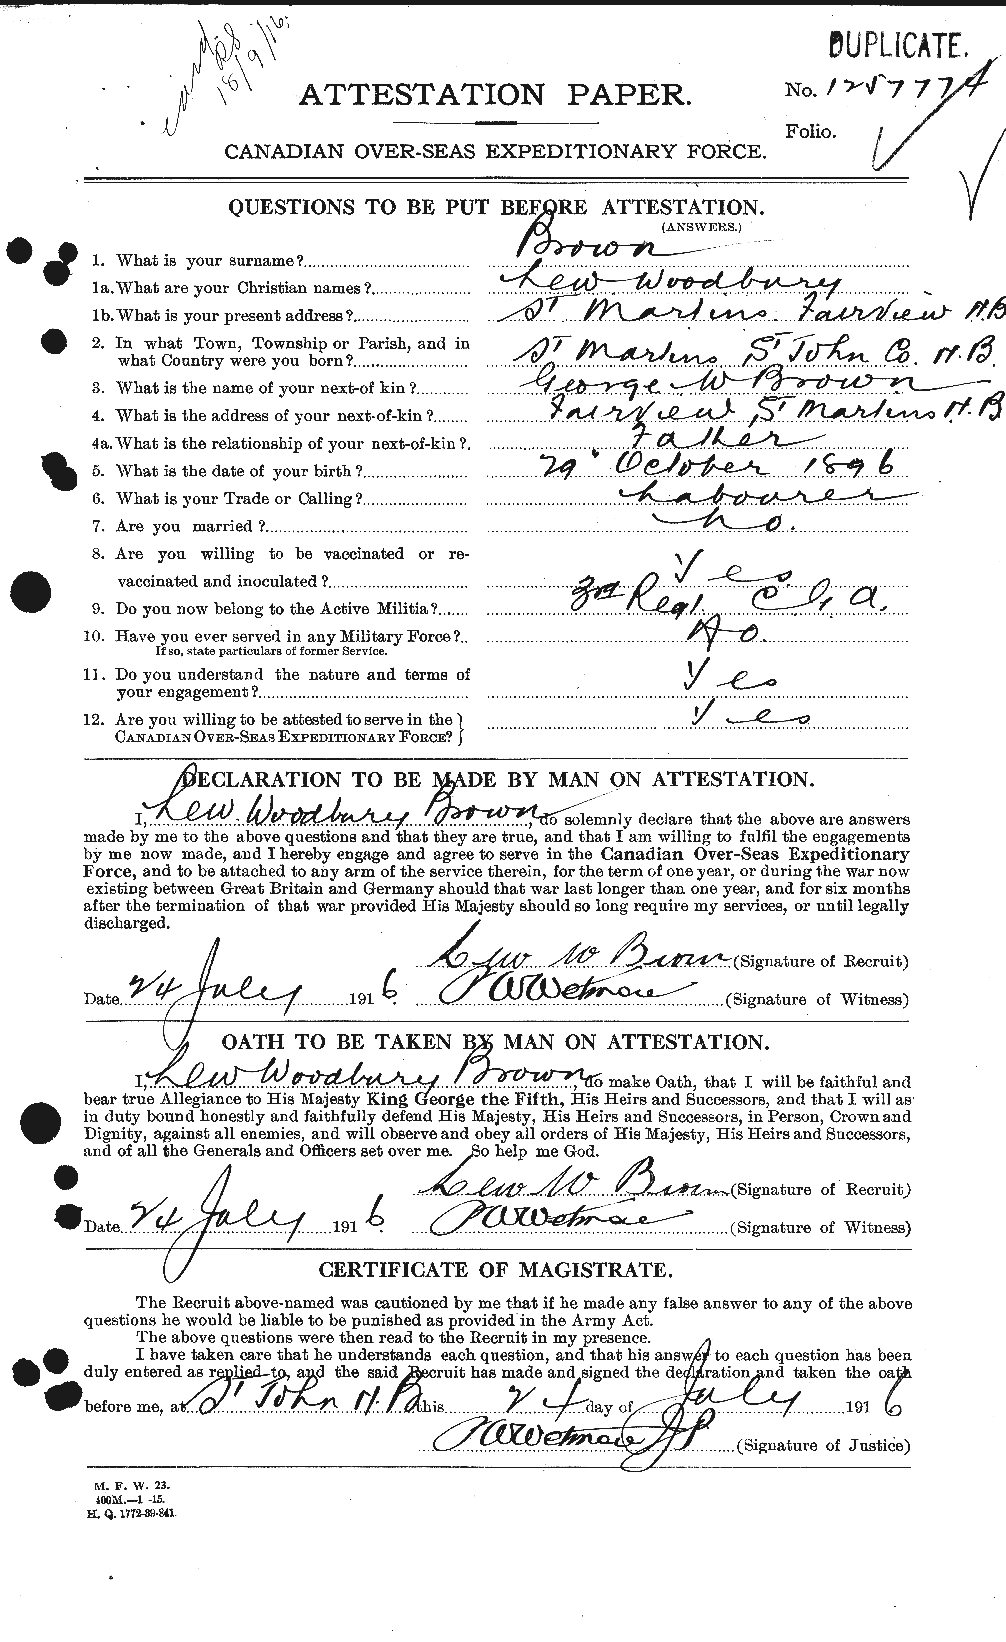 Personnel Records of the First World War - CEF 266313a